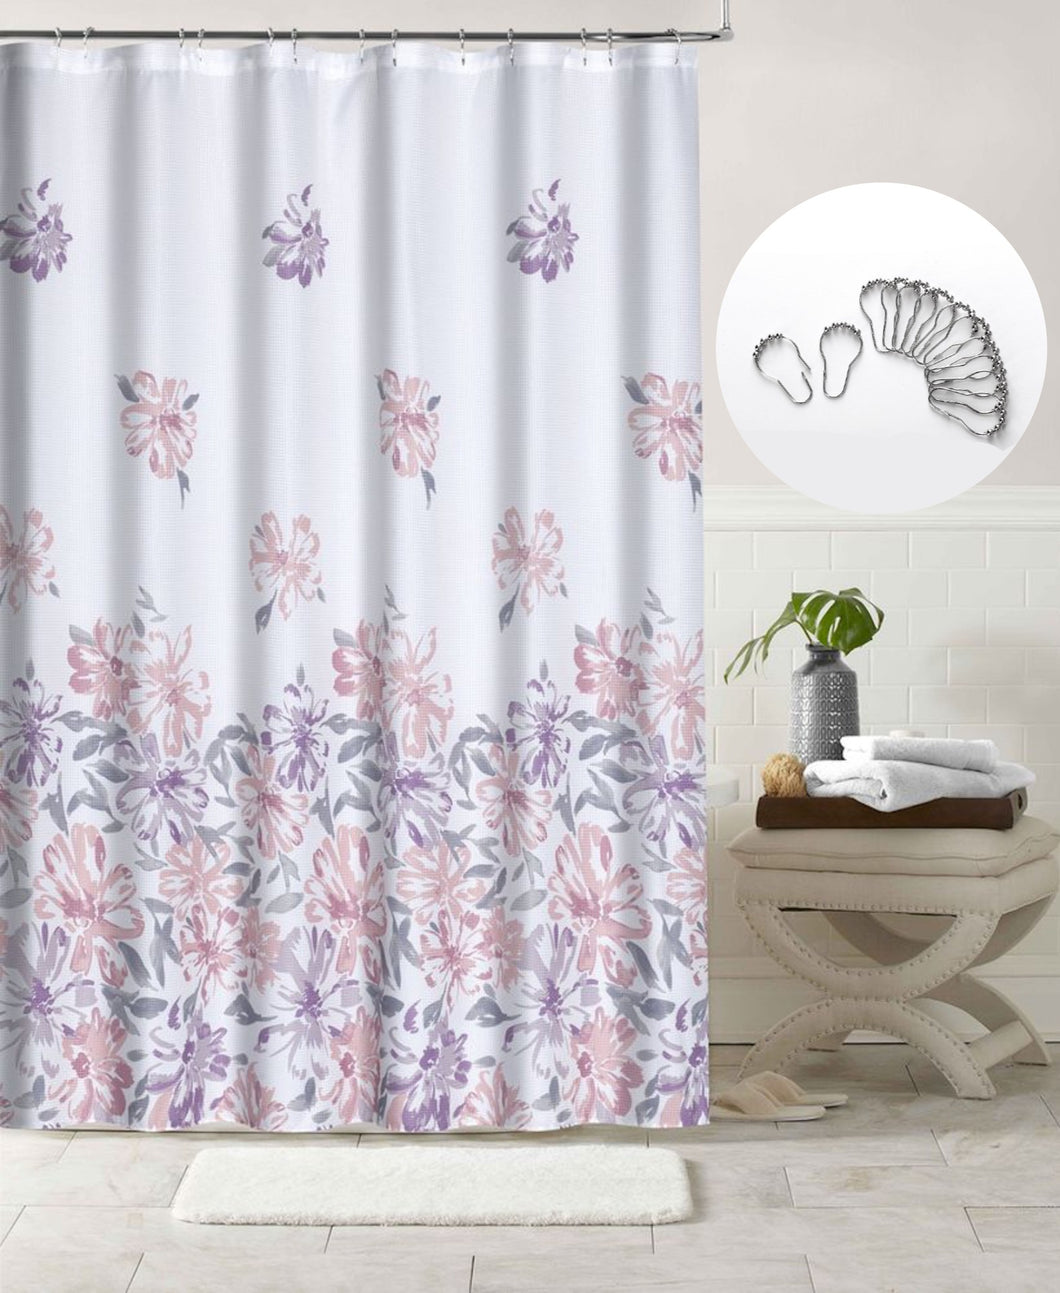 Dainty Home 13 Piece Bouquet Printed Waffle Weave Textured Shower Curtain And 12 Metal Rollerball Hooks